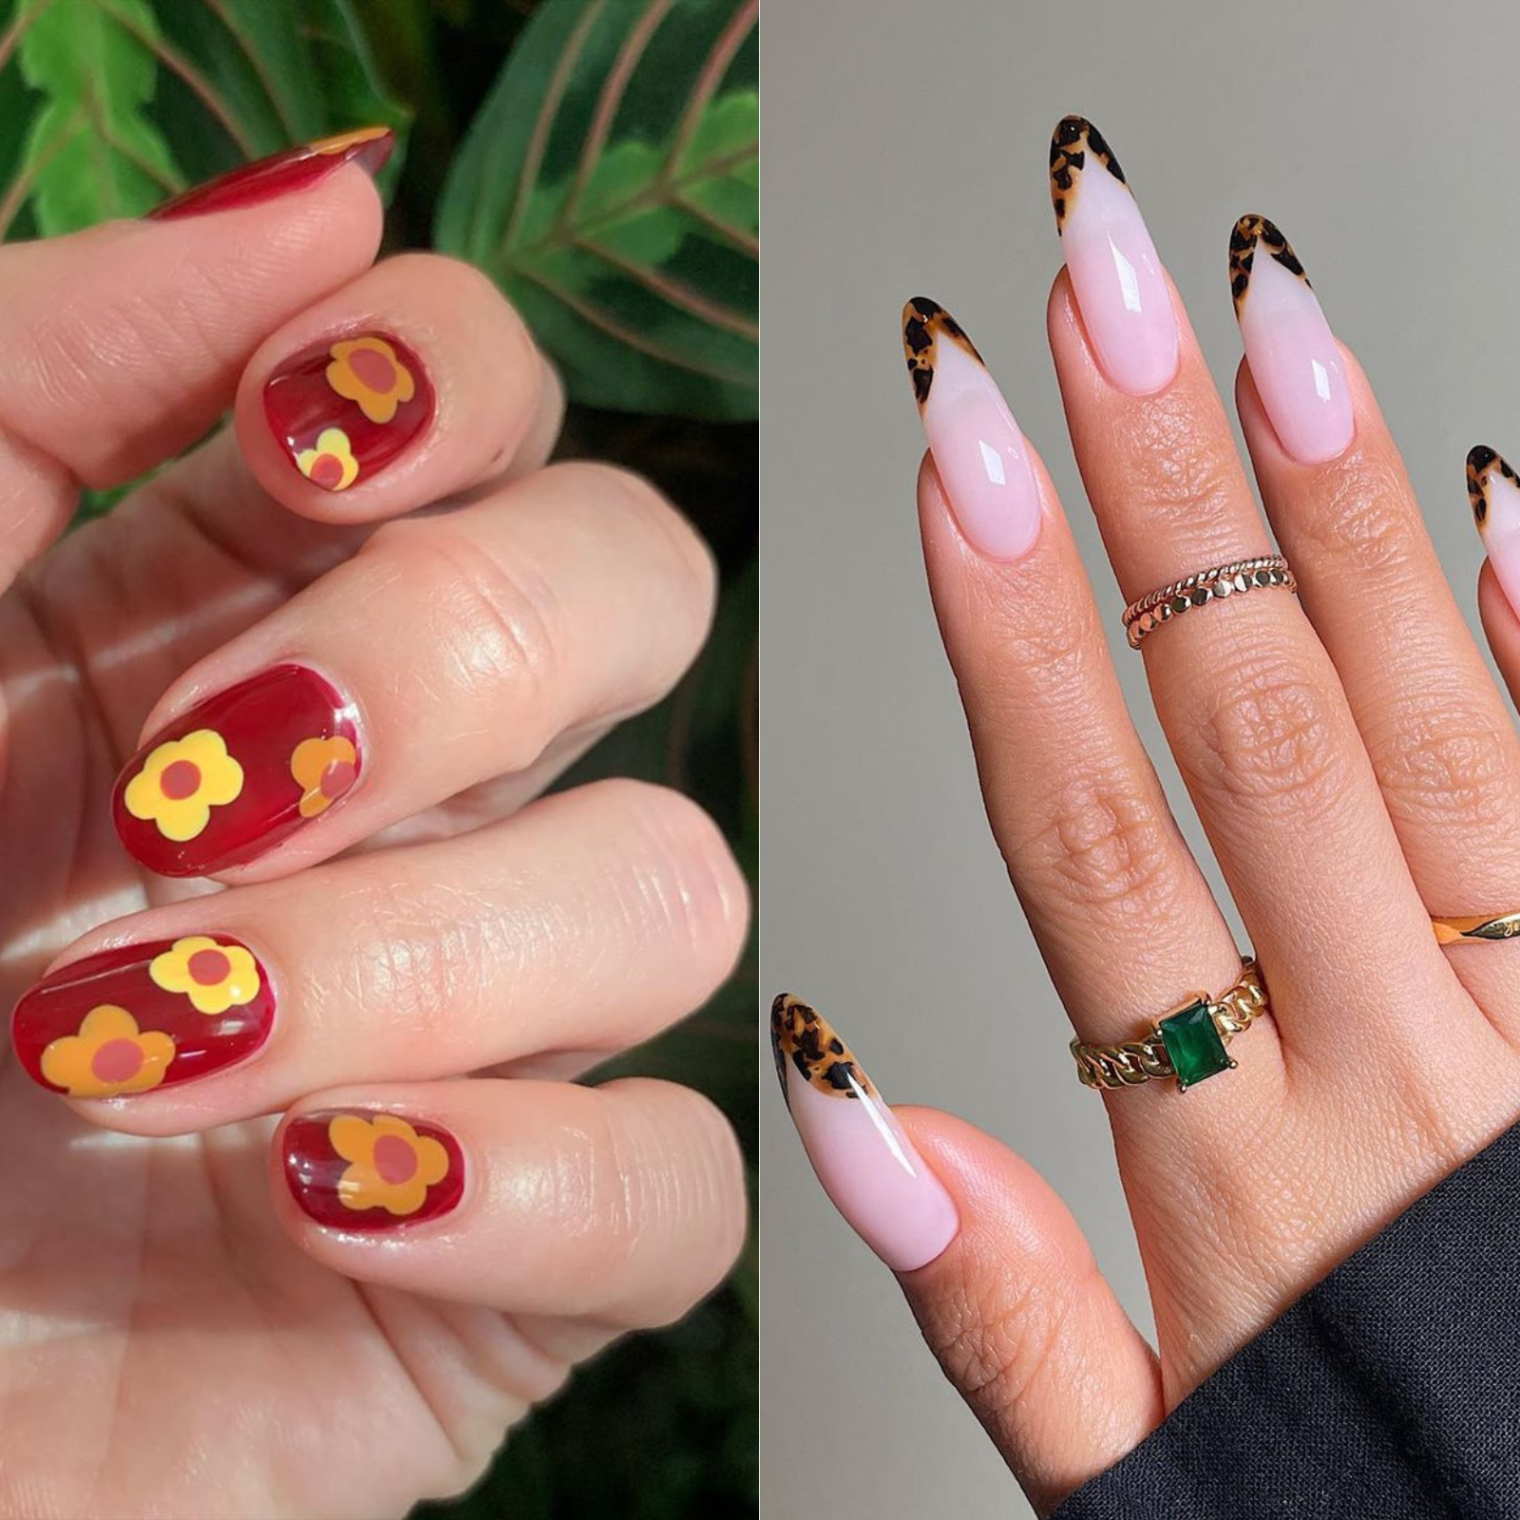 Get Trendy With These Must-try Nail Art Designs For Fall! 🍂💅 #nailart #autumnnails